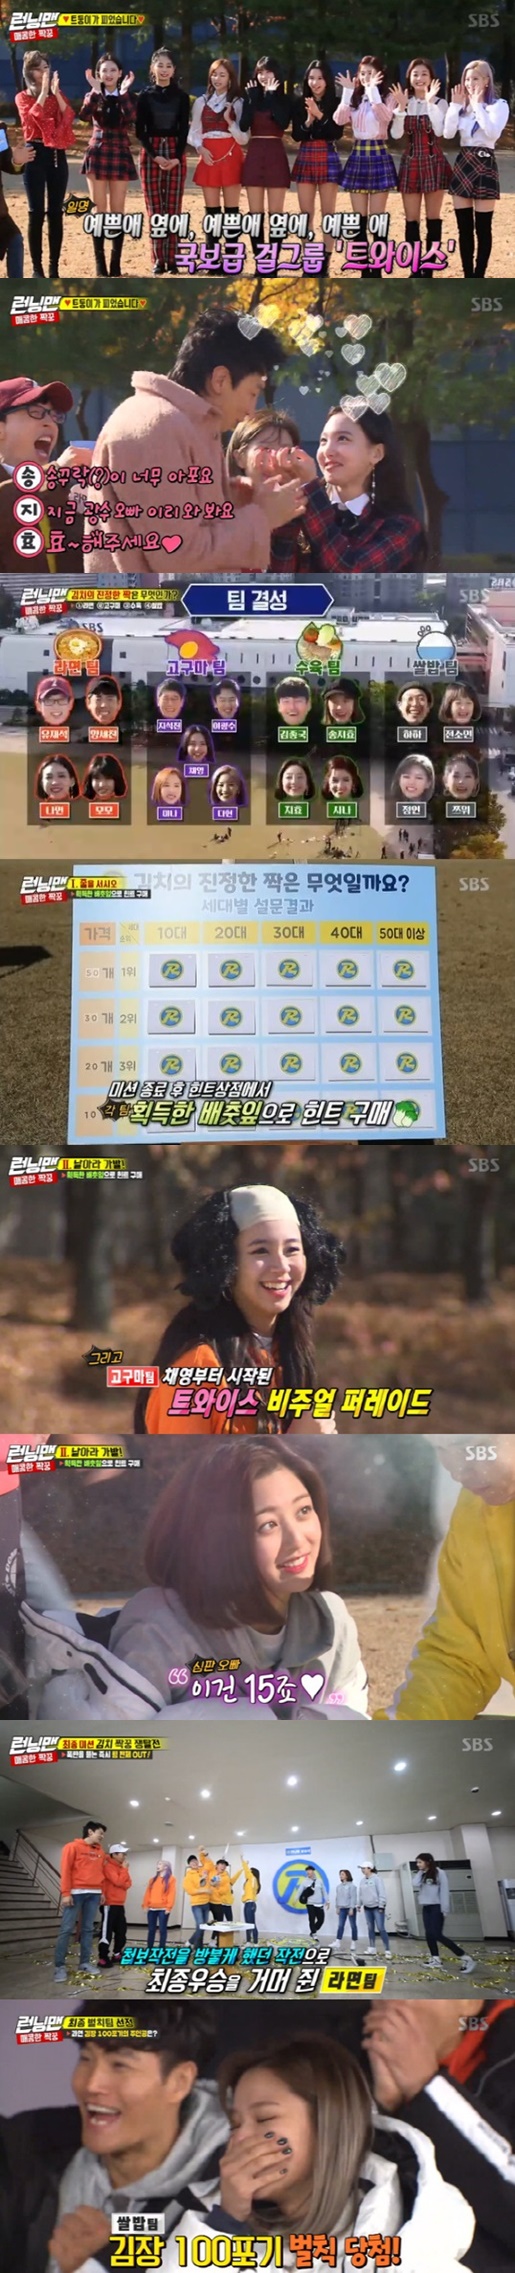 <p>2 days broadcast SBS Running ManRunning Man’ sister group TWICE appeared for the Mustangs of the true mate to find Kim the most distinctive ‘spicy paired peek-a-Boo’ lace decorated.</p><p>This race is a team competition with a view as if the team is Yoo Jae-Suk, Yang and more as well, Momo, I smoke, and Sweet potato team in the analysis, Lee Kwang-Soo, Chae, Mina, Implementation, Training, Team Kim Jong Kook, Song JI Hyo,, Hyo, Rice team in that one, small, square, Richardson sub divided into.</p><p>Each team has a ‘line’ through the game fierce confrontation unfolded, the team, the academic team, and Sweet potato teams each have 1 win by handing out the hints acquired, and Round 2 of the ‘fly! The wig-switching in the Sweet potato with the team if the team is 1 for, 2 for to or once the hint is acquired.</p><p>The last final round that the menu is attached to the name tag off of the menu when you exchange, while a bomb attached to the name tags off team the power is out, and the menu until the opponent beyond the race program began. Ago min is Lee Kwang-Soos name tag to open, but the A bomb was, this Rice team is the power being out face. Water and water our father, and our exchange in La, teams info to start up, expand, and ‘kimchis true even’exclaim the headquarters seat and headed towards, training, team support available to the team or the name of the tag off as when I smoke “then”and cry victory.</p><p>Great 100 give Driving Cycle penalty for the uncle in the game Rice team of the square ‘shit son’, born and penalties in winning was and this scene is up to 8. 8%(Seoul Capital Area household viewership standard)to record the ‘best 1 minute’.</p>